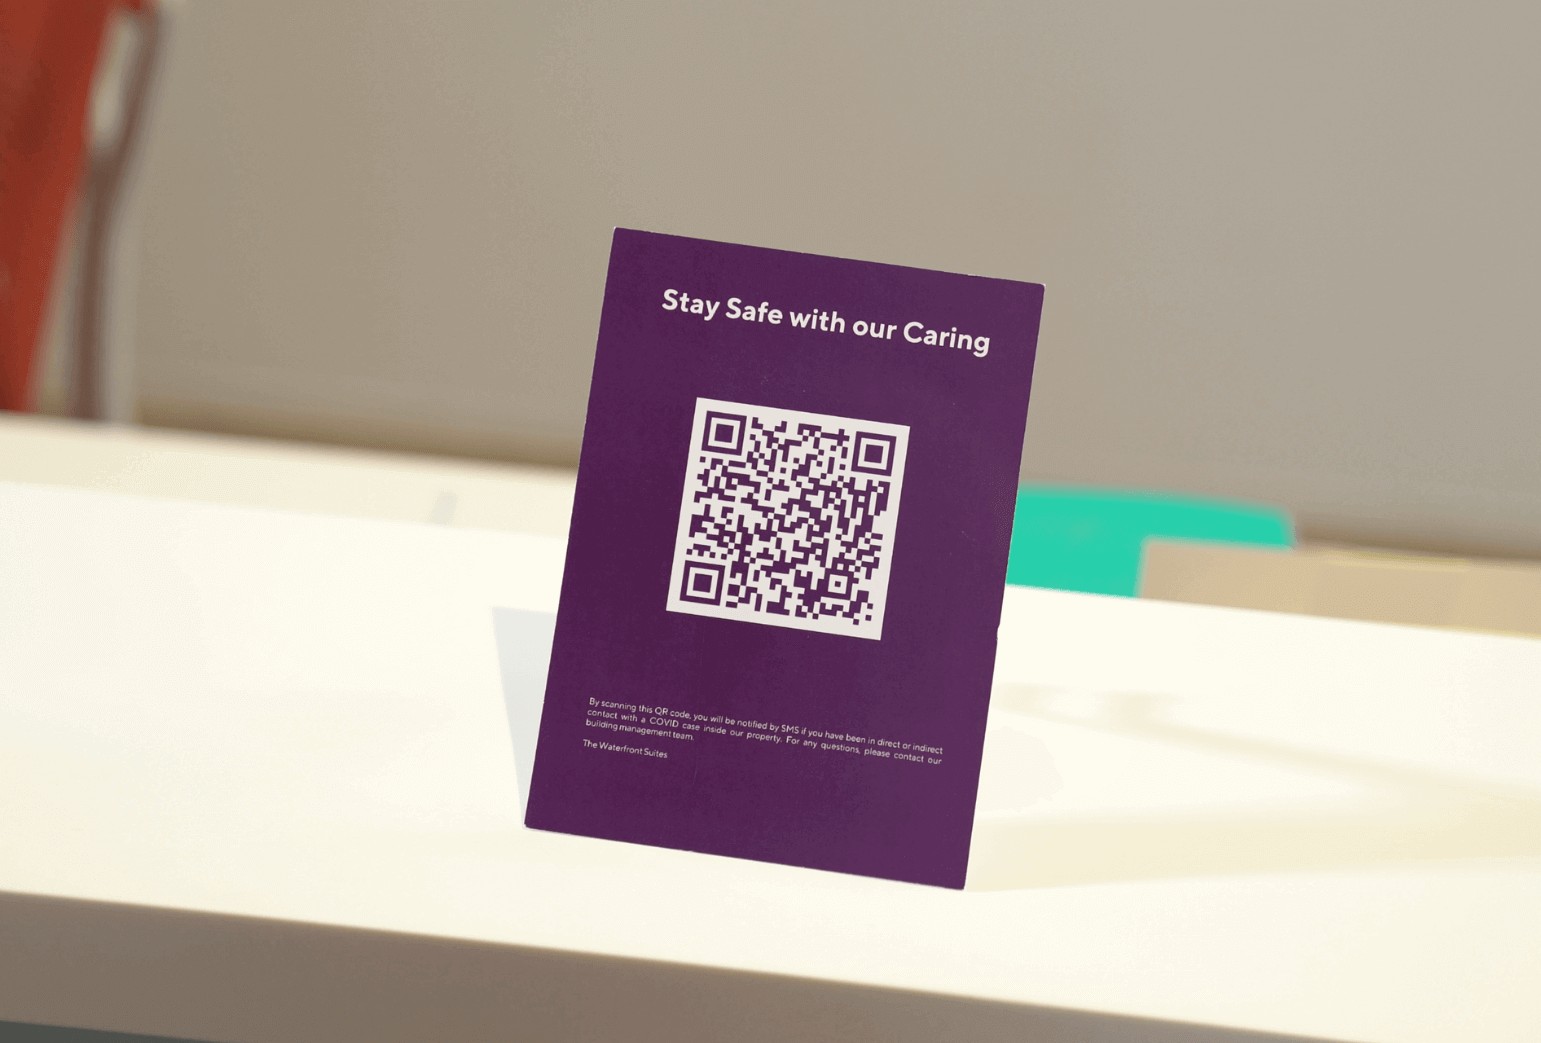 QR codes used for COVID tracing and recognition purposes